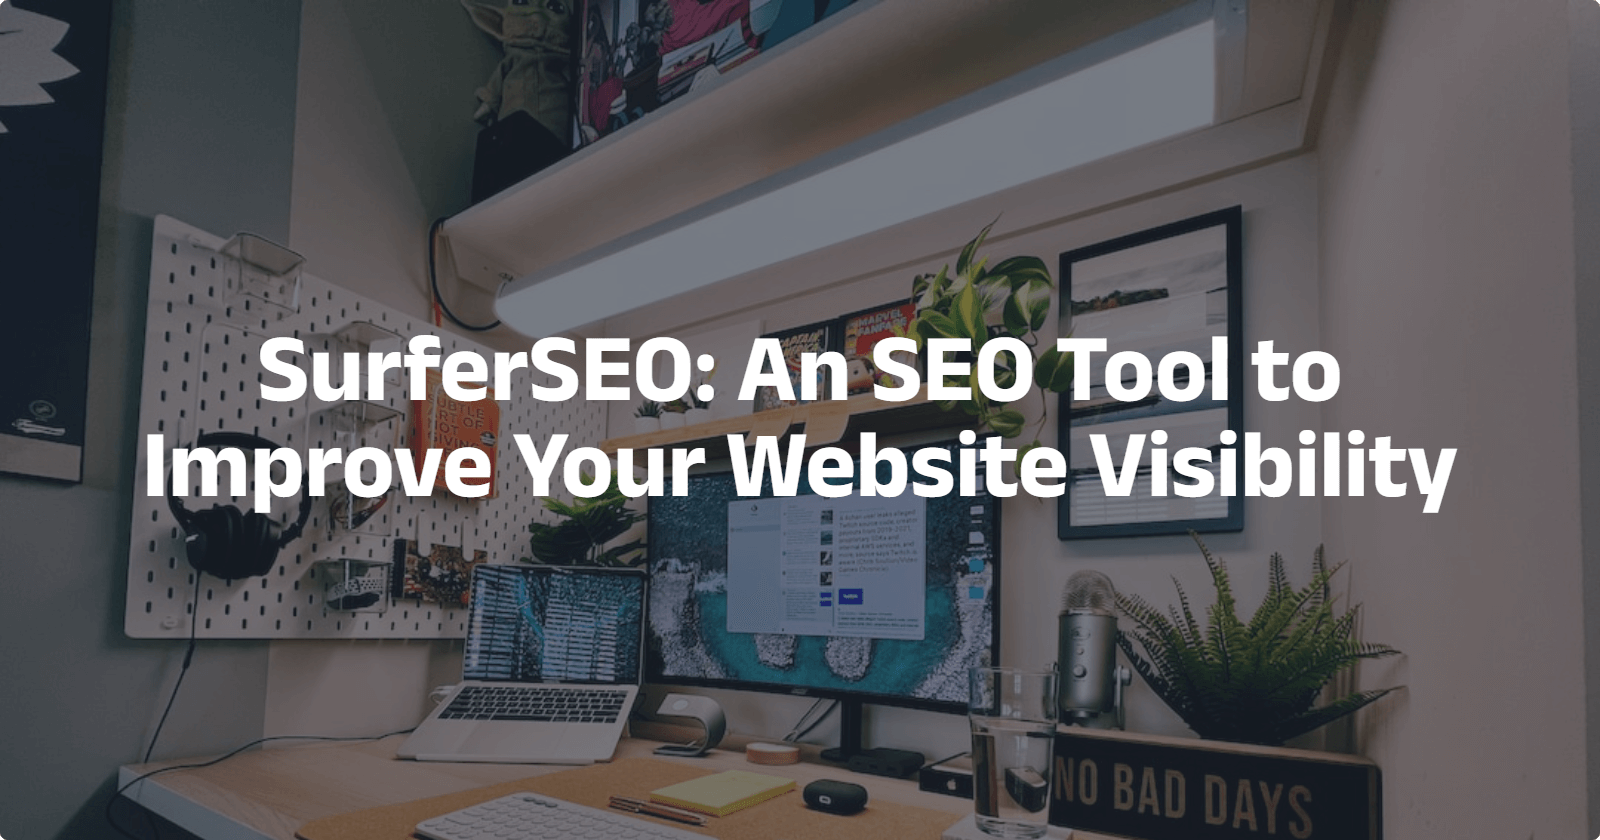 SurferSEO: An SEO Tool to Improve Your Website Visibility